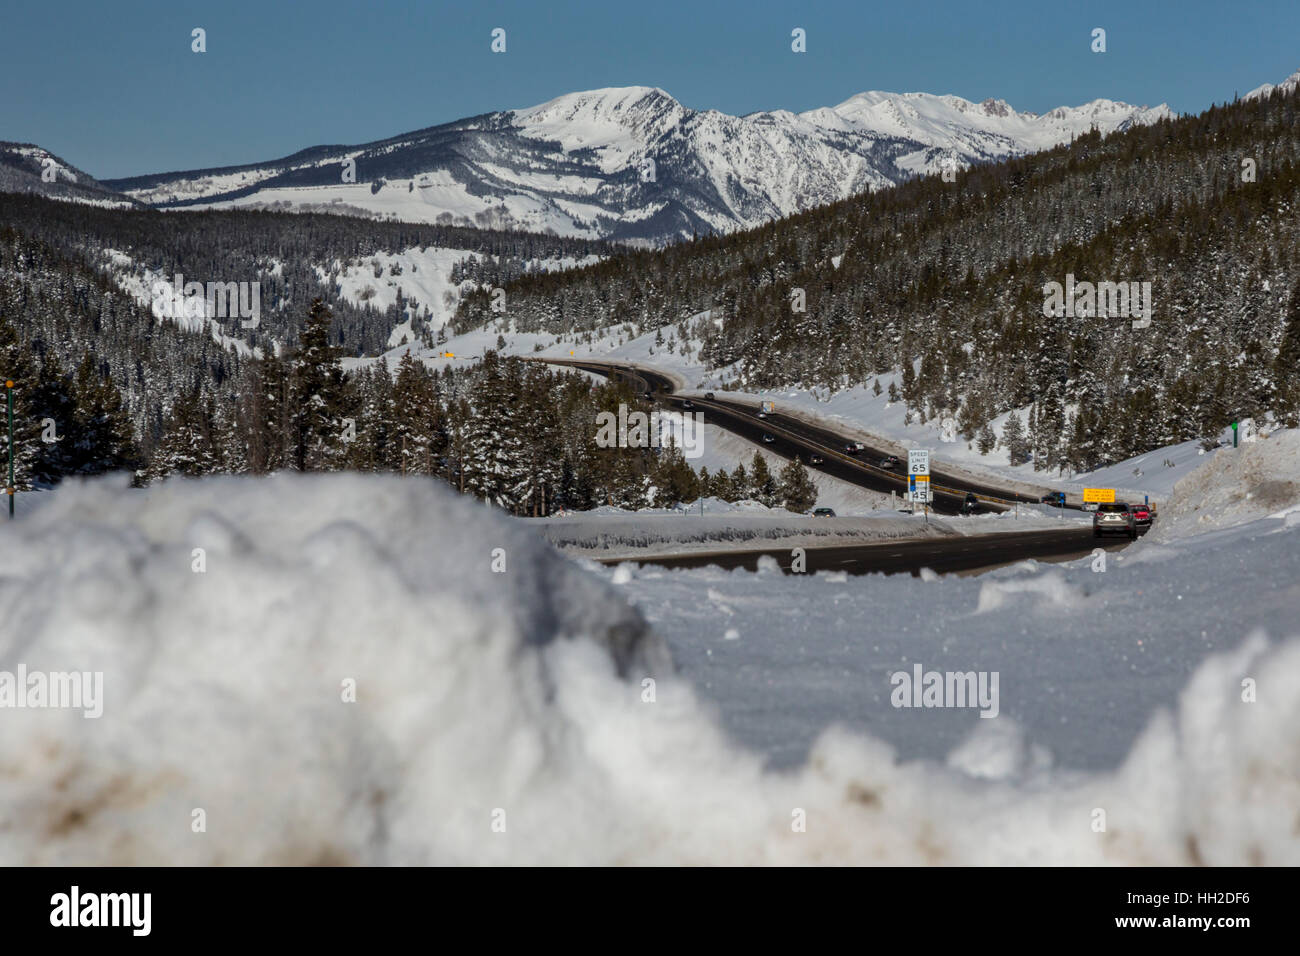 Vail, Colorado - Winter on Interstate 70 at Vail Pass at in the Rocky Mountains. Stock Photo